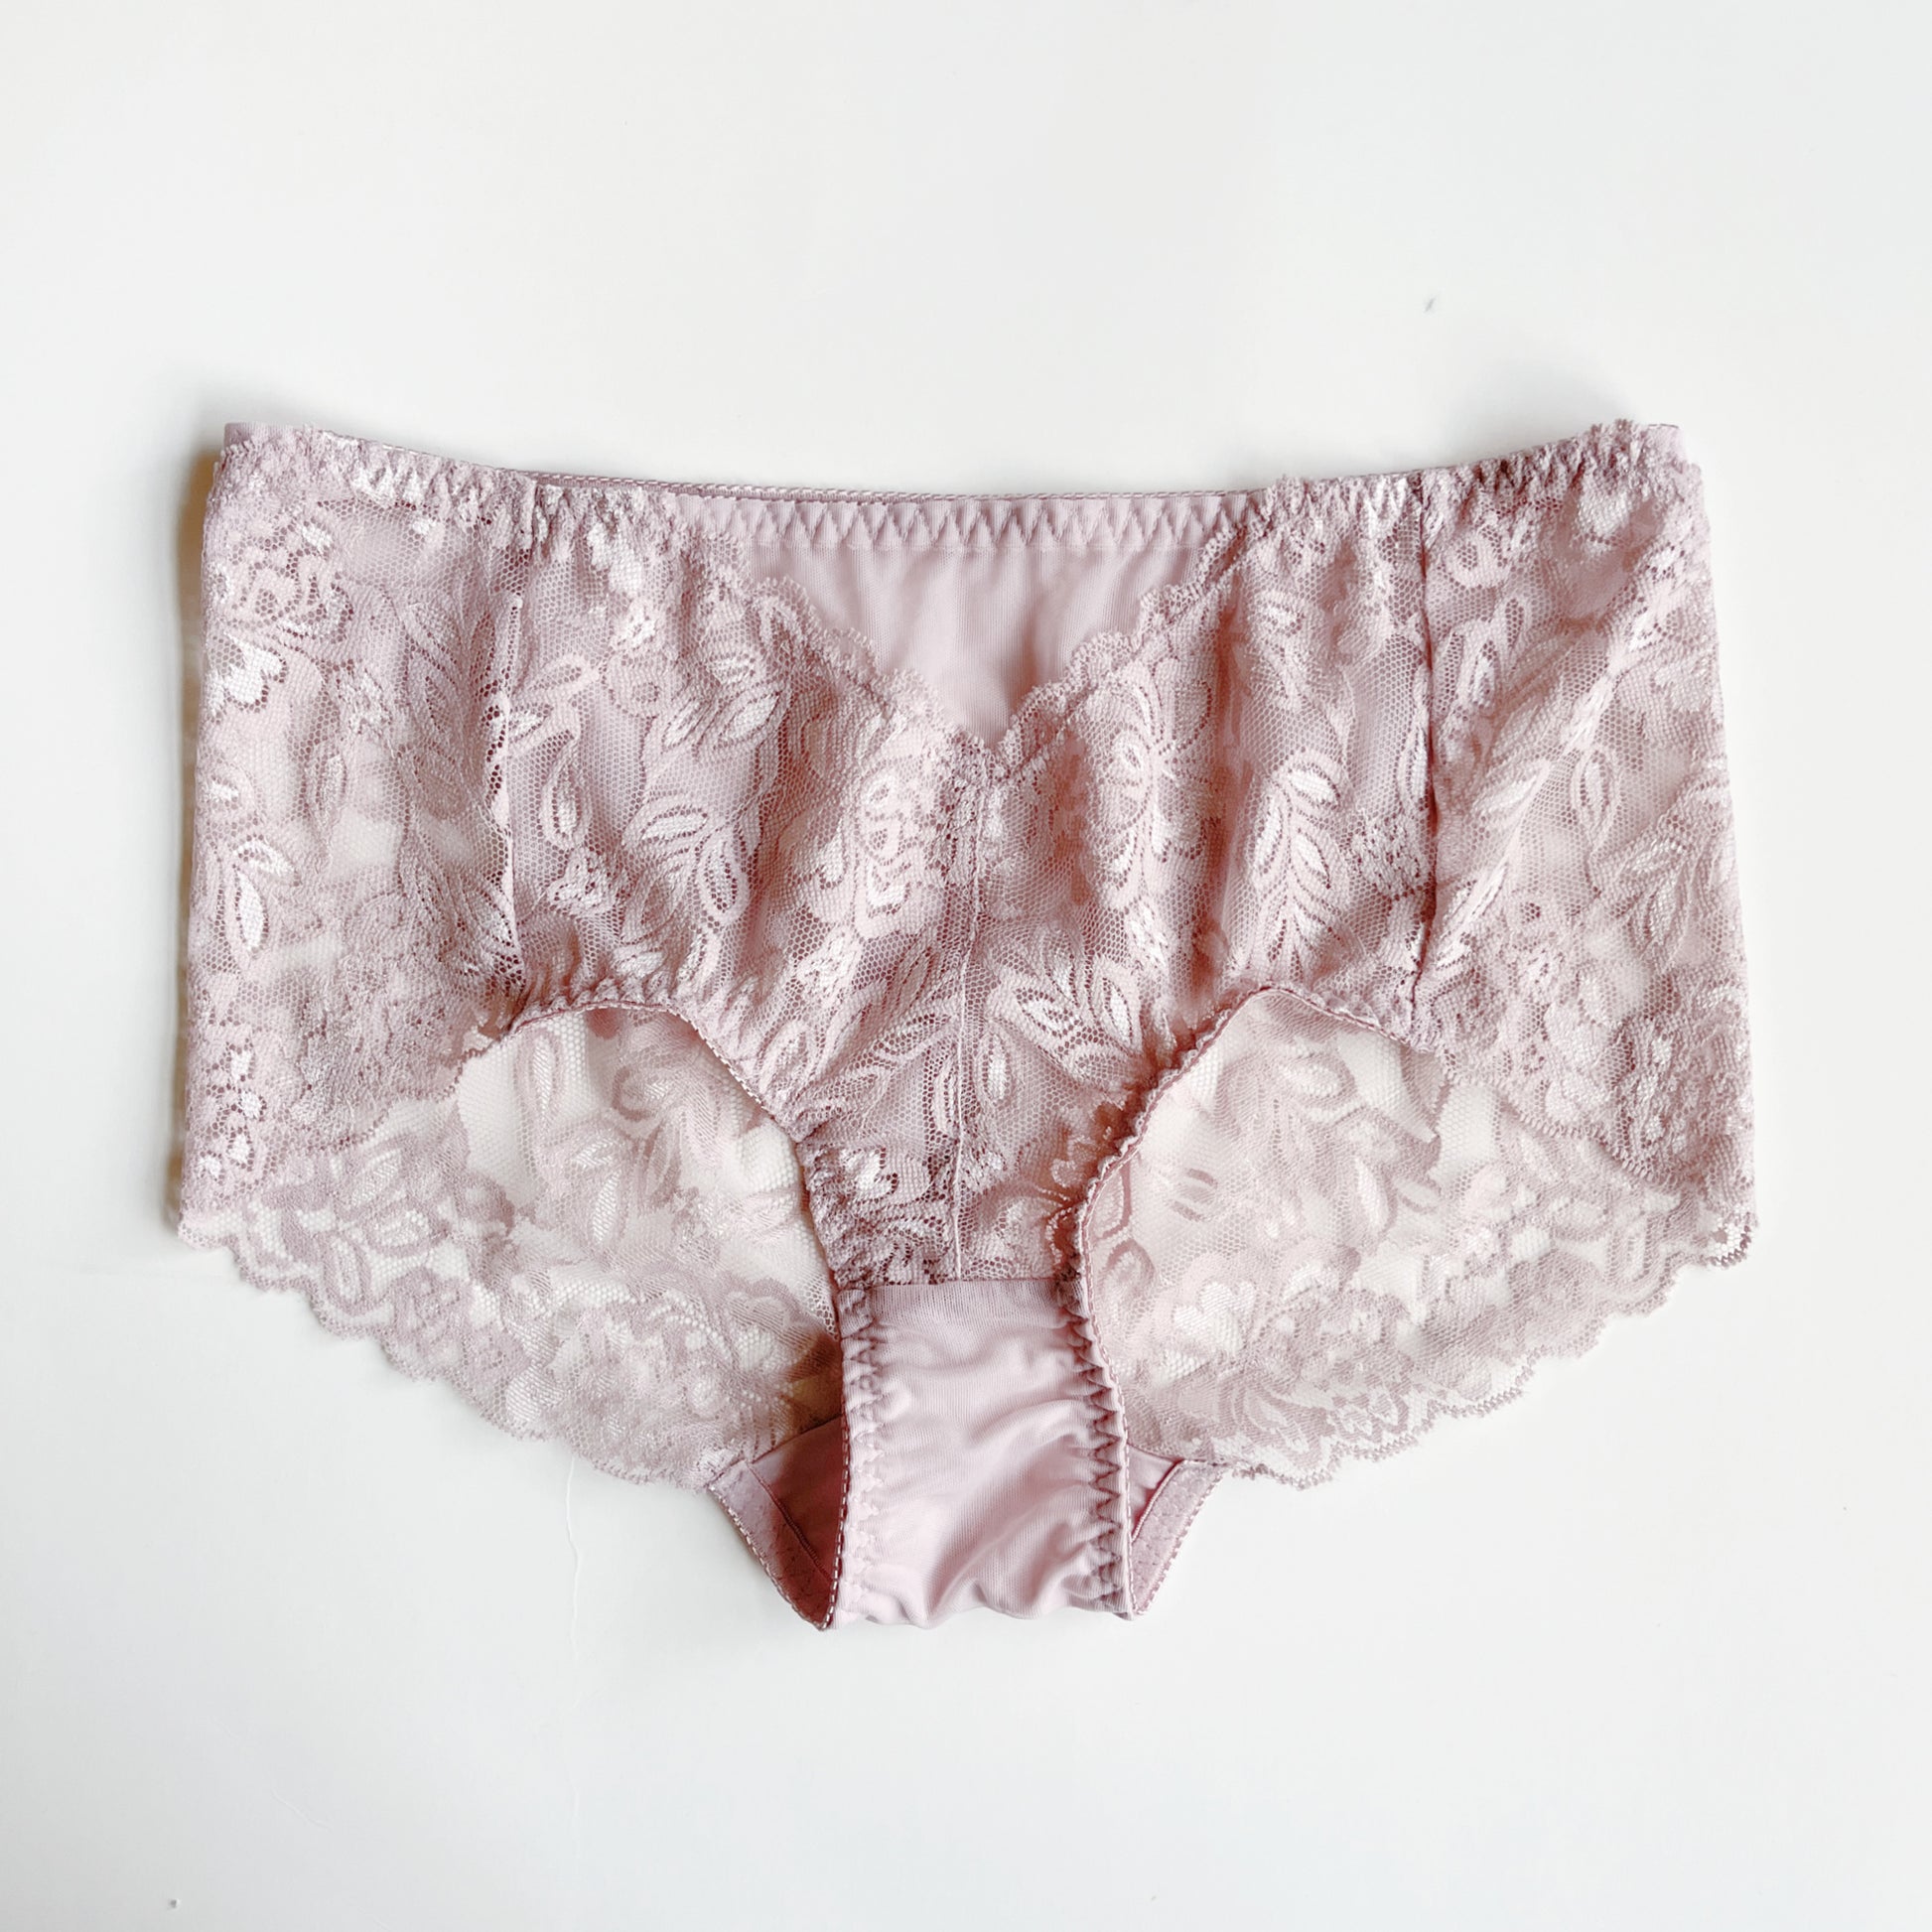 Pink silk panties high waist | Made in Canada scalloped lace underwear 